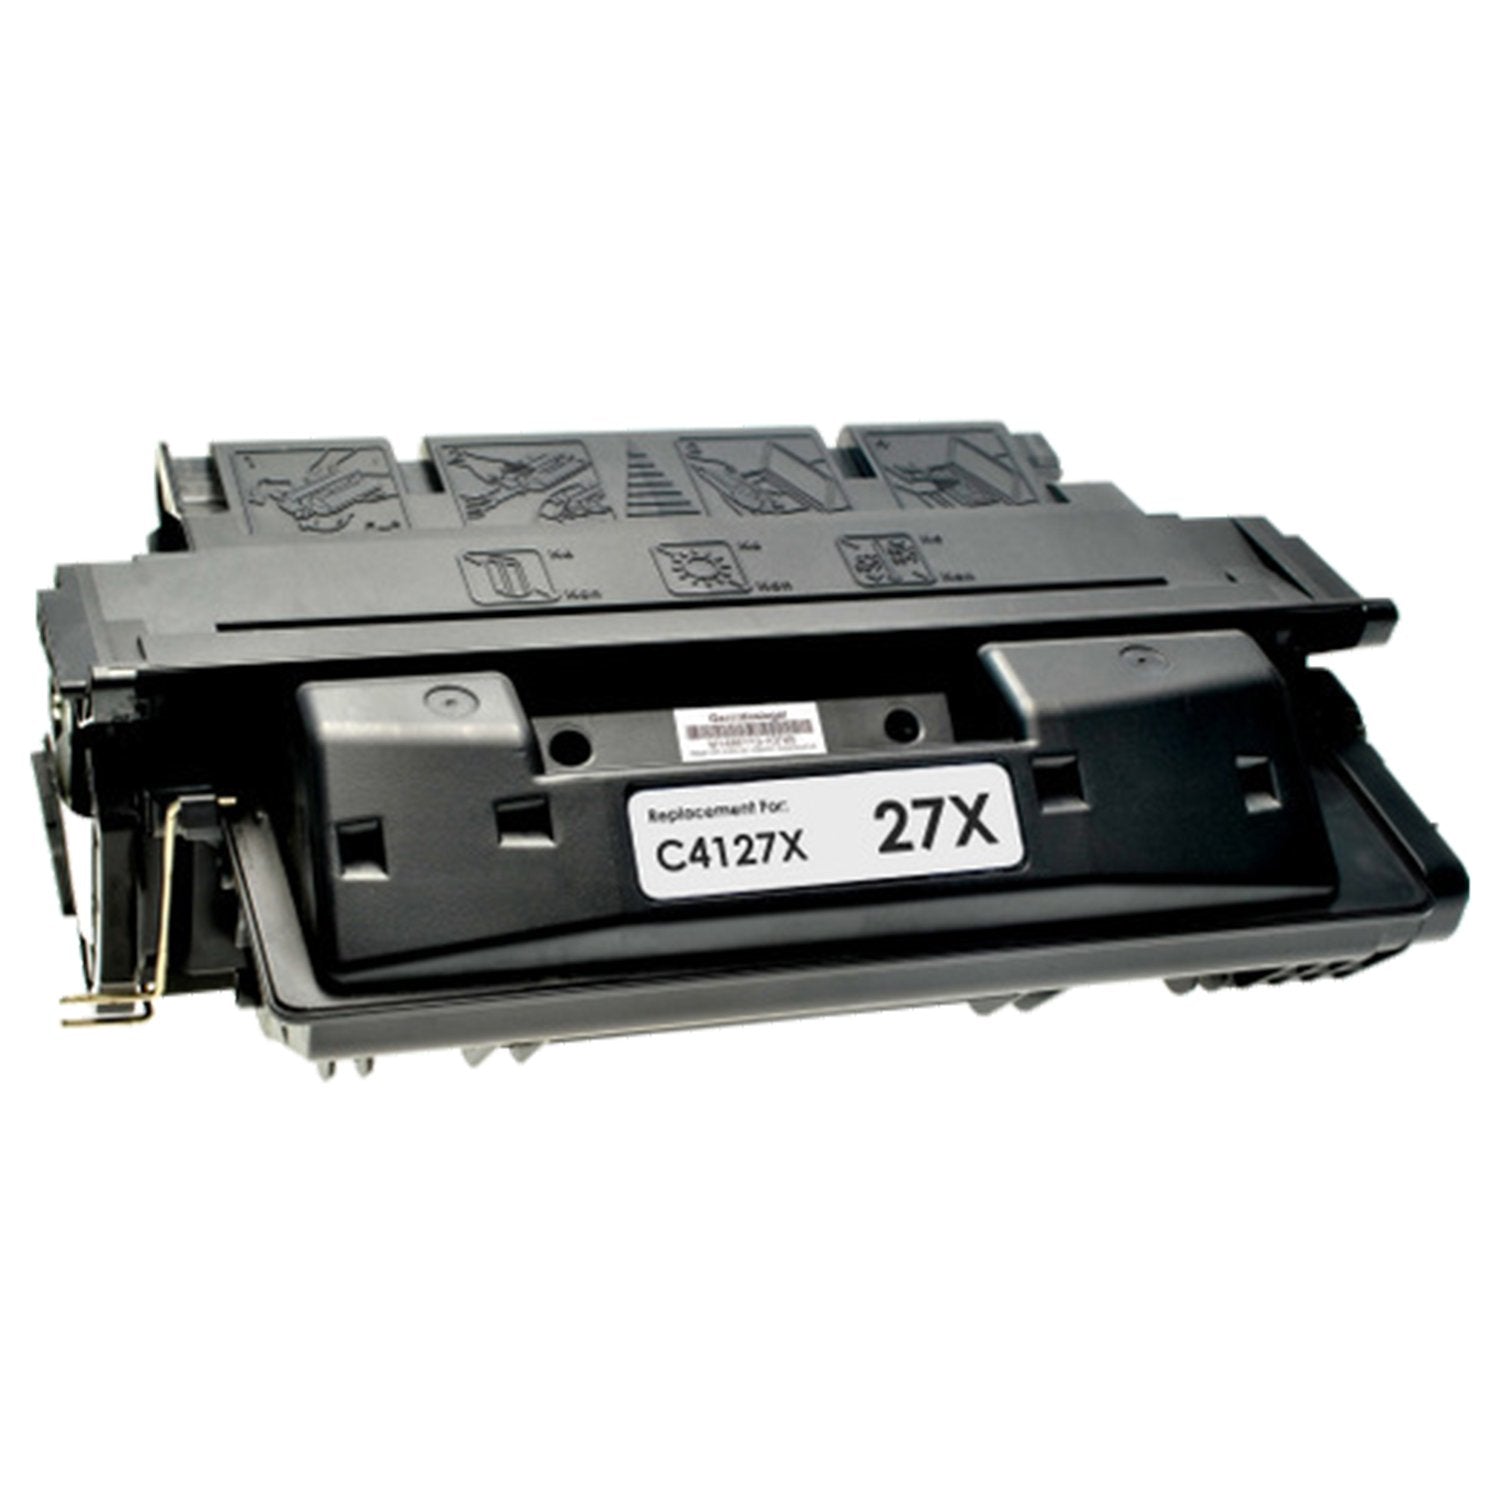 Absolute Toner Compatible C4127X HP 27X High Yield Black Toner Cartridge | Absolute Toner HP Toner Cartridges